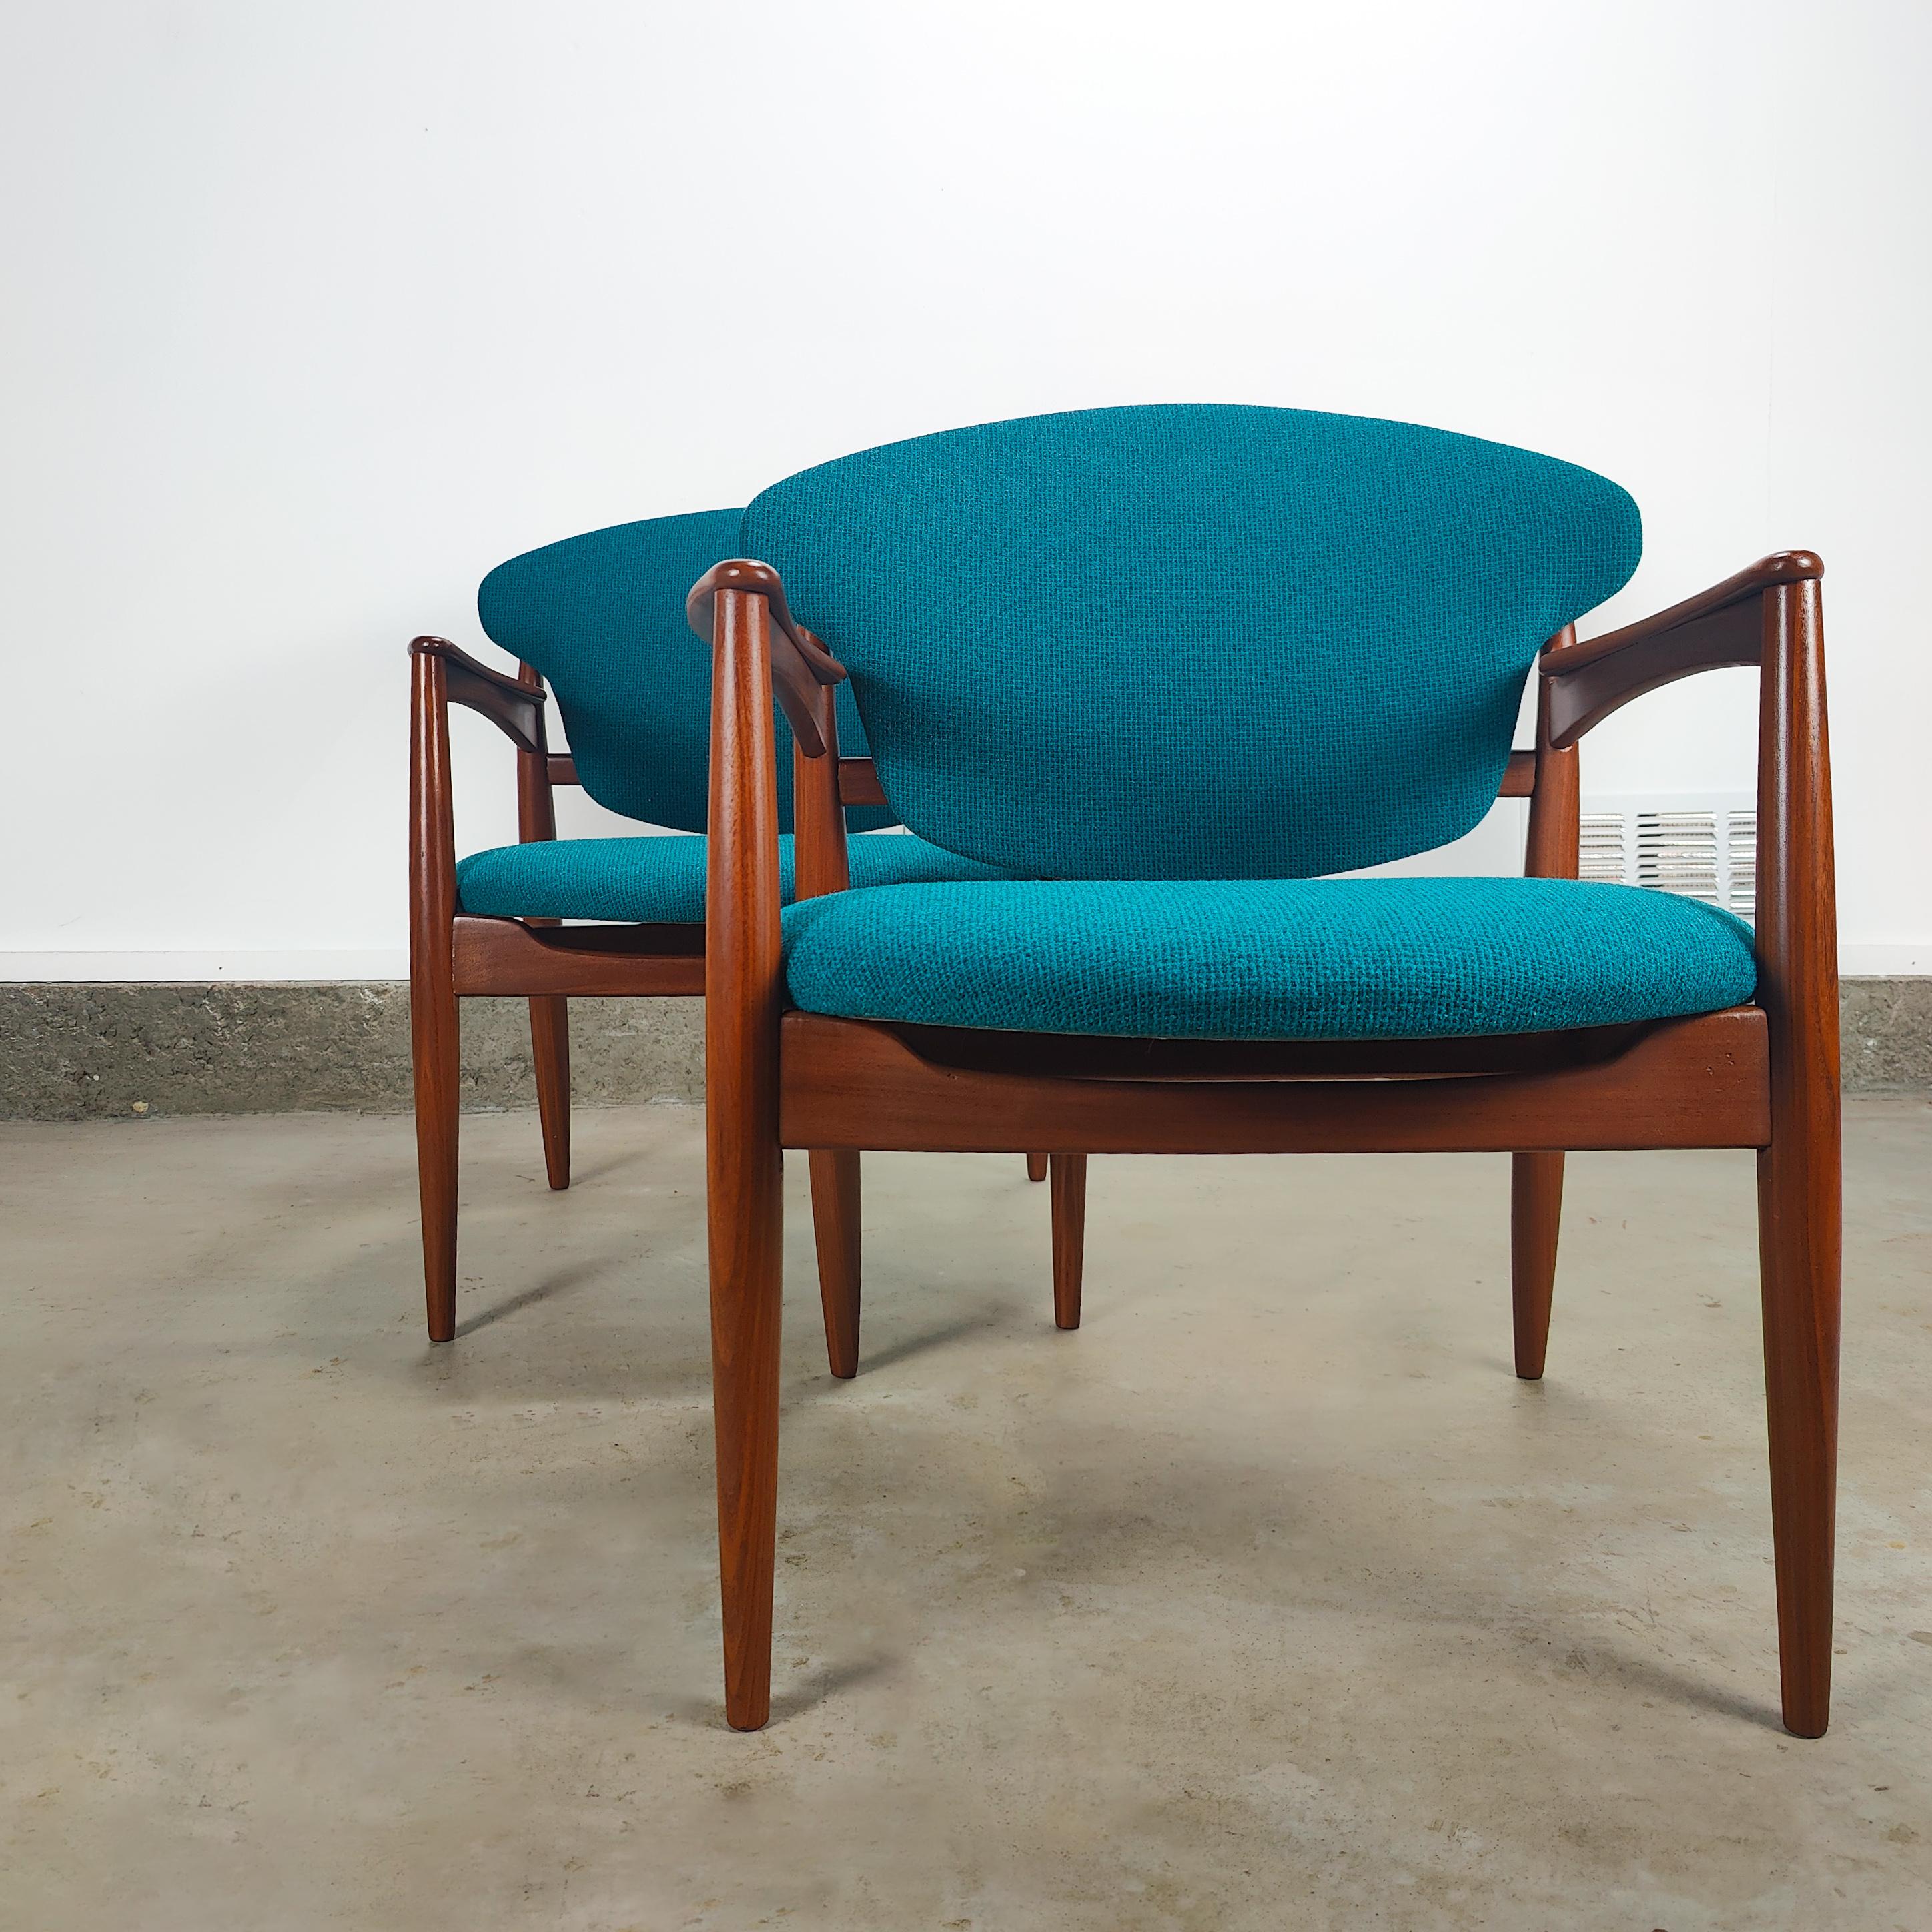 Mid-20th Century Vintage Midcentury Chairs by L.K. Hjelle Stol & Møbelfabrikk For Sale